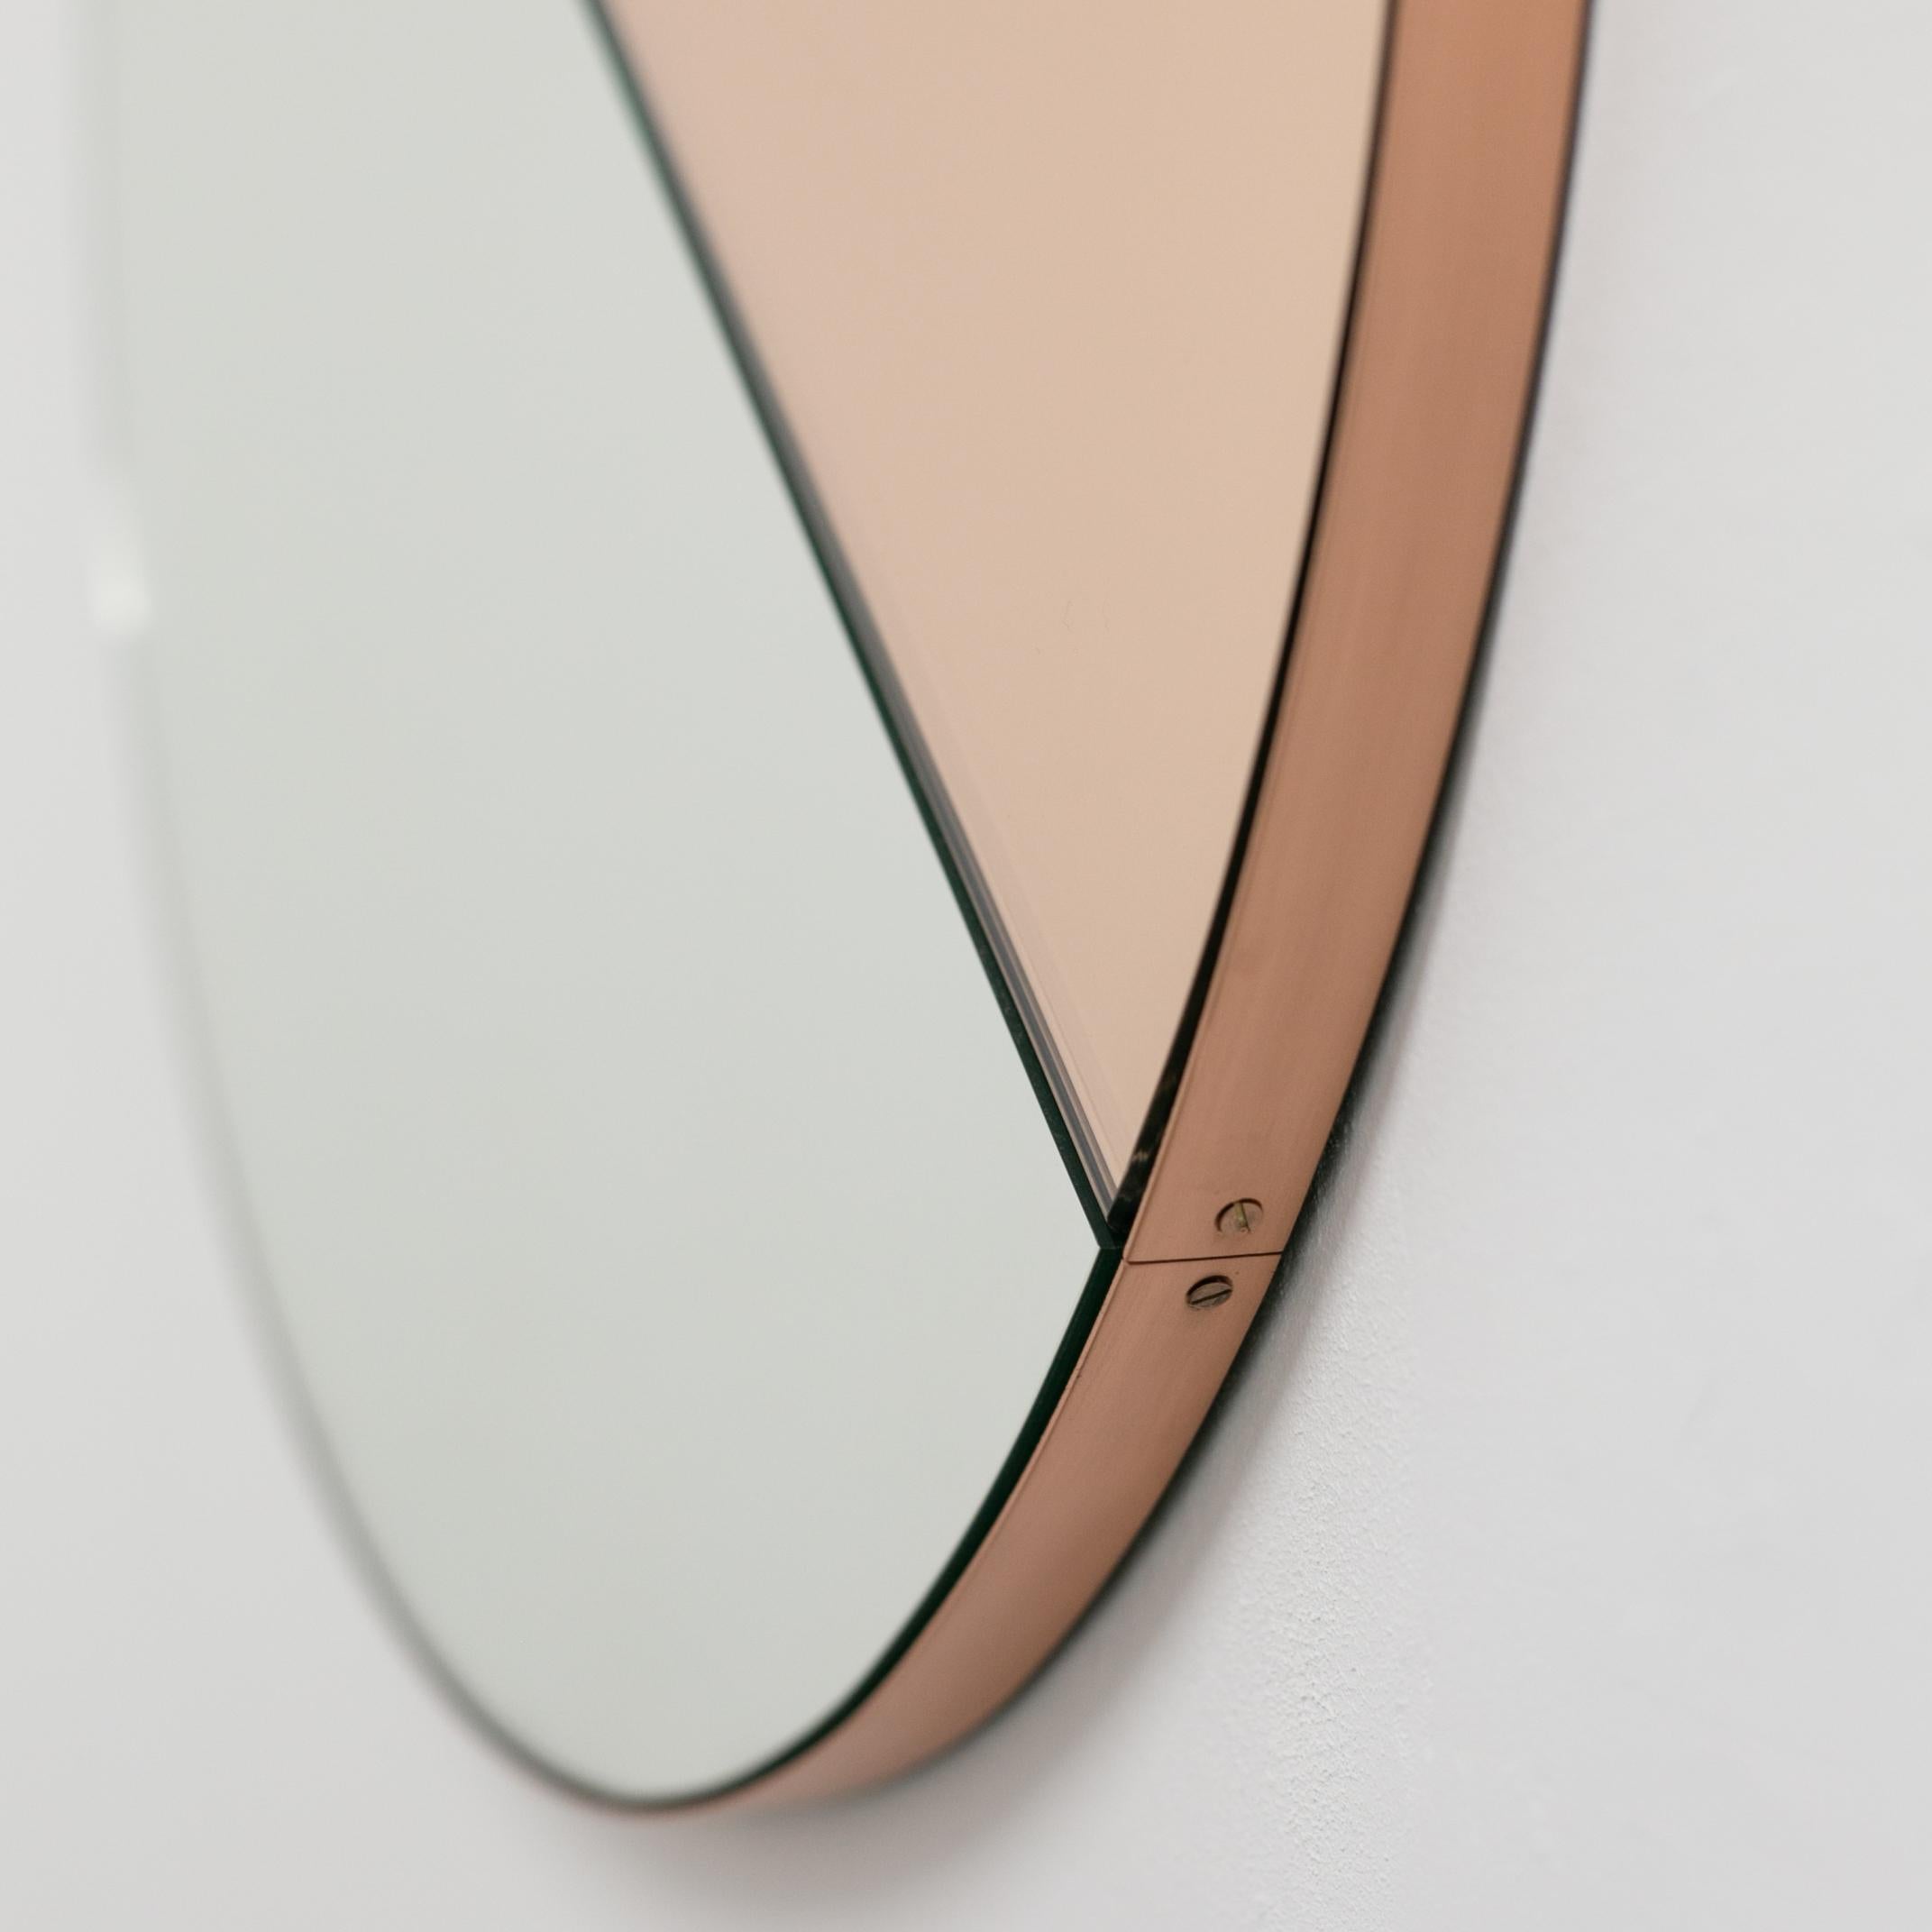 British Orbis Dualis Mixed Rose Gold Tint Contemporary Round Mirror, Copper Frame, Small For Sale